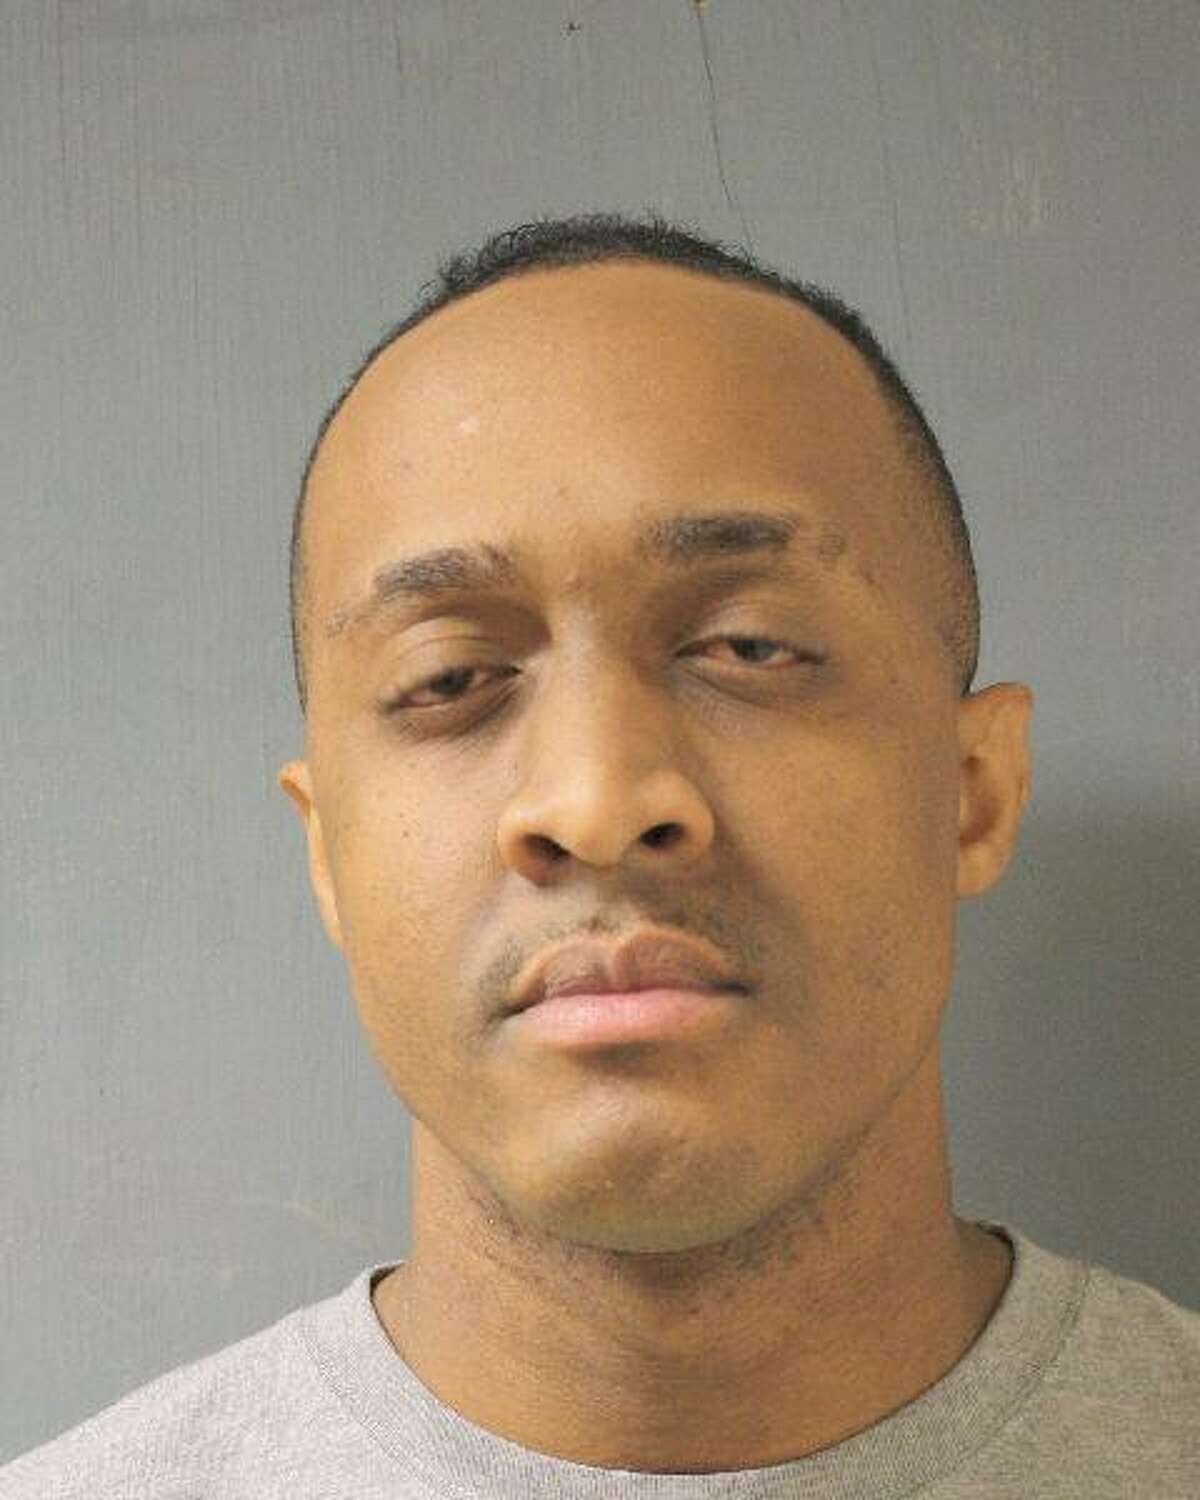 PHOTOS: Wrong side of the law Brandin Glisby, a former Harris County Precinct 6 deputy constable, is facing life in prison on charges that he sexually assaulted a woman during a traffic stop in 2017. Glispy, 31, was fired and arrested after being accused a woman he pulled over on in the 5800 block of Martin Luther King, using his constable vehicle on April 24, 2017. >>>See other area law officers who've gotten in trouble with the law recently ...